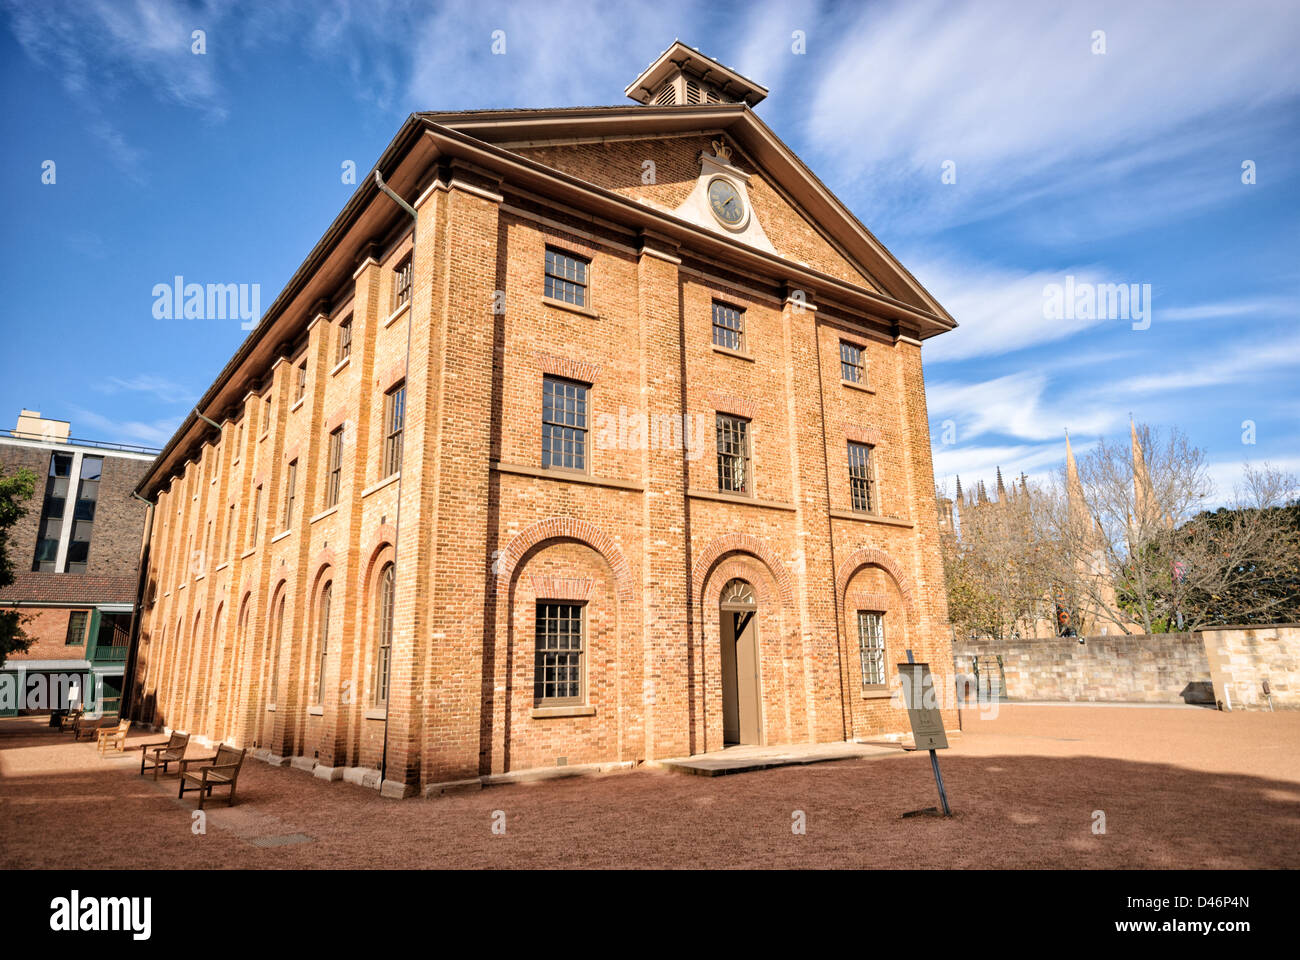 Old Australian convict accommodation: the colonial era Hyde Park Barracks, Sydney. This is now a museum. Colonial architecture; heritage building Stock Photo